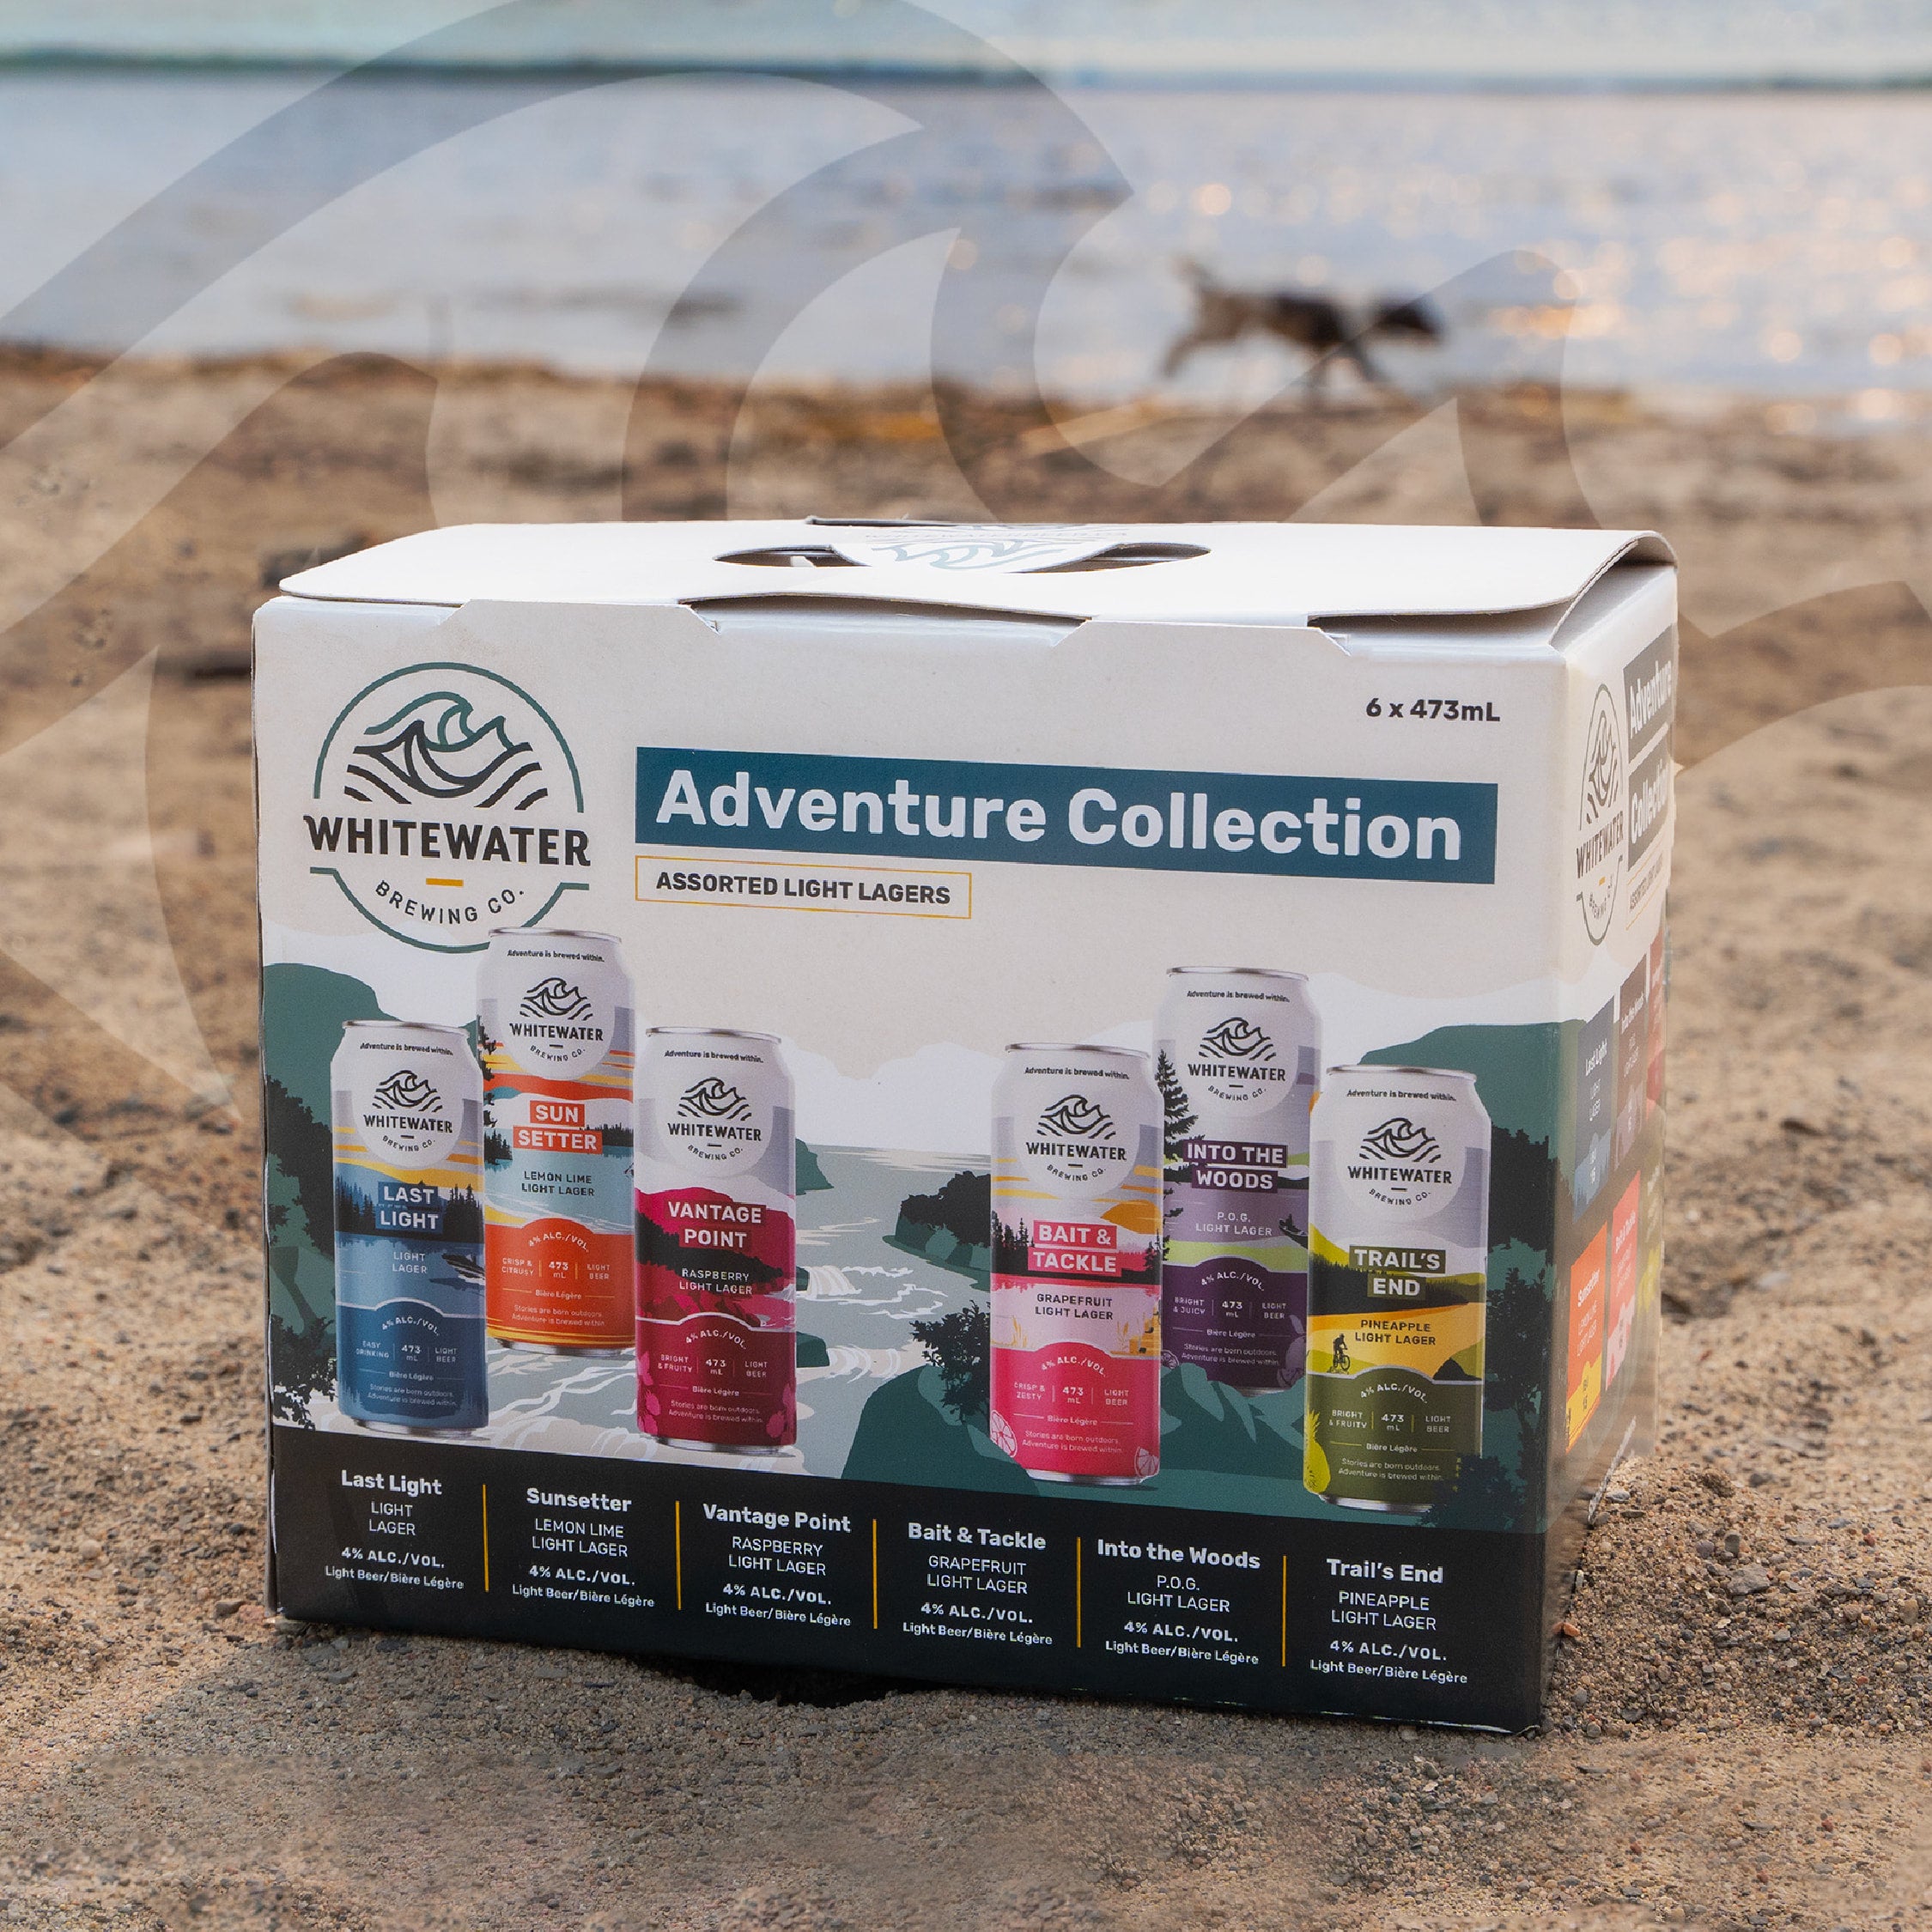 Adventure Collection six Pack - Assorted Light Lagers